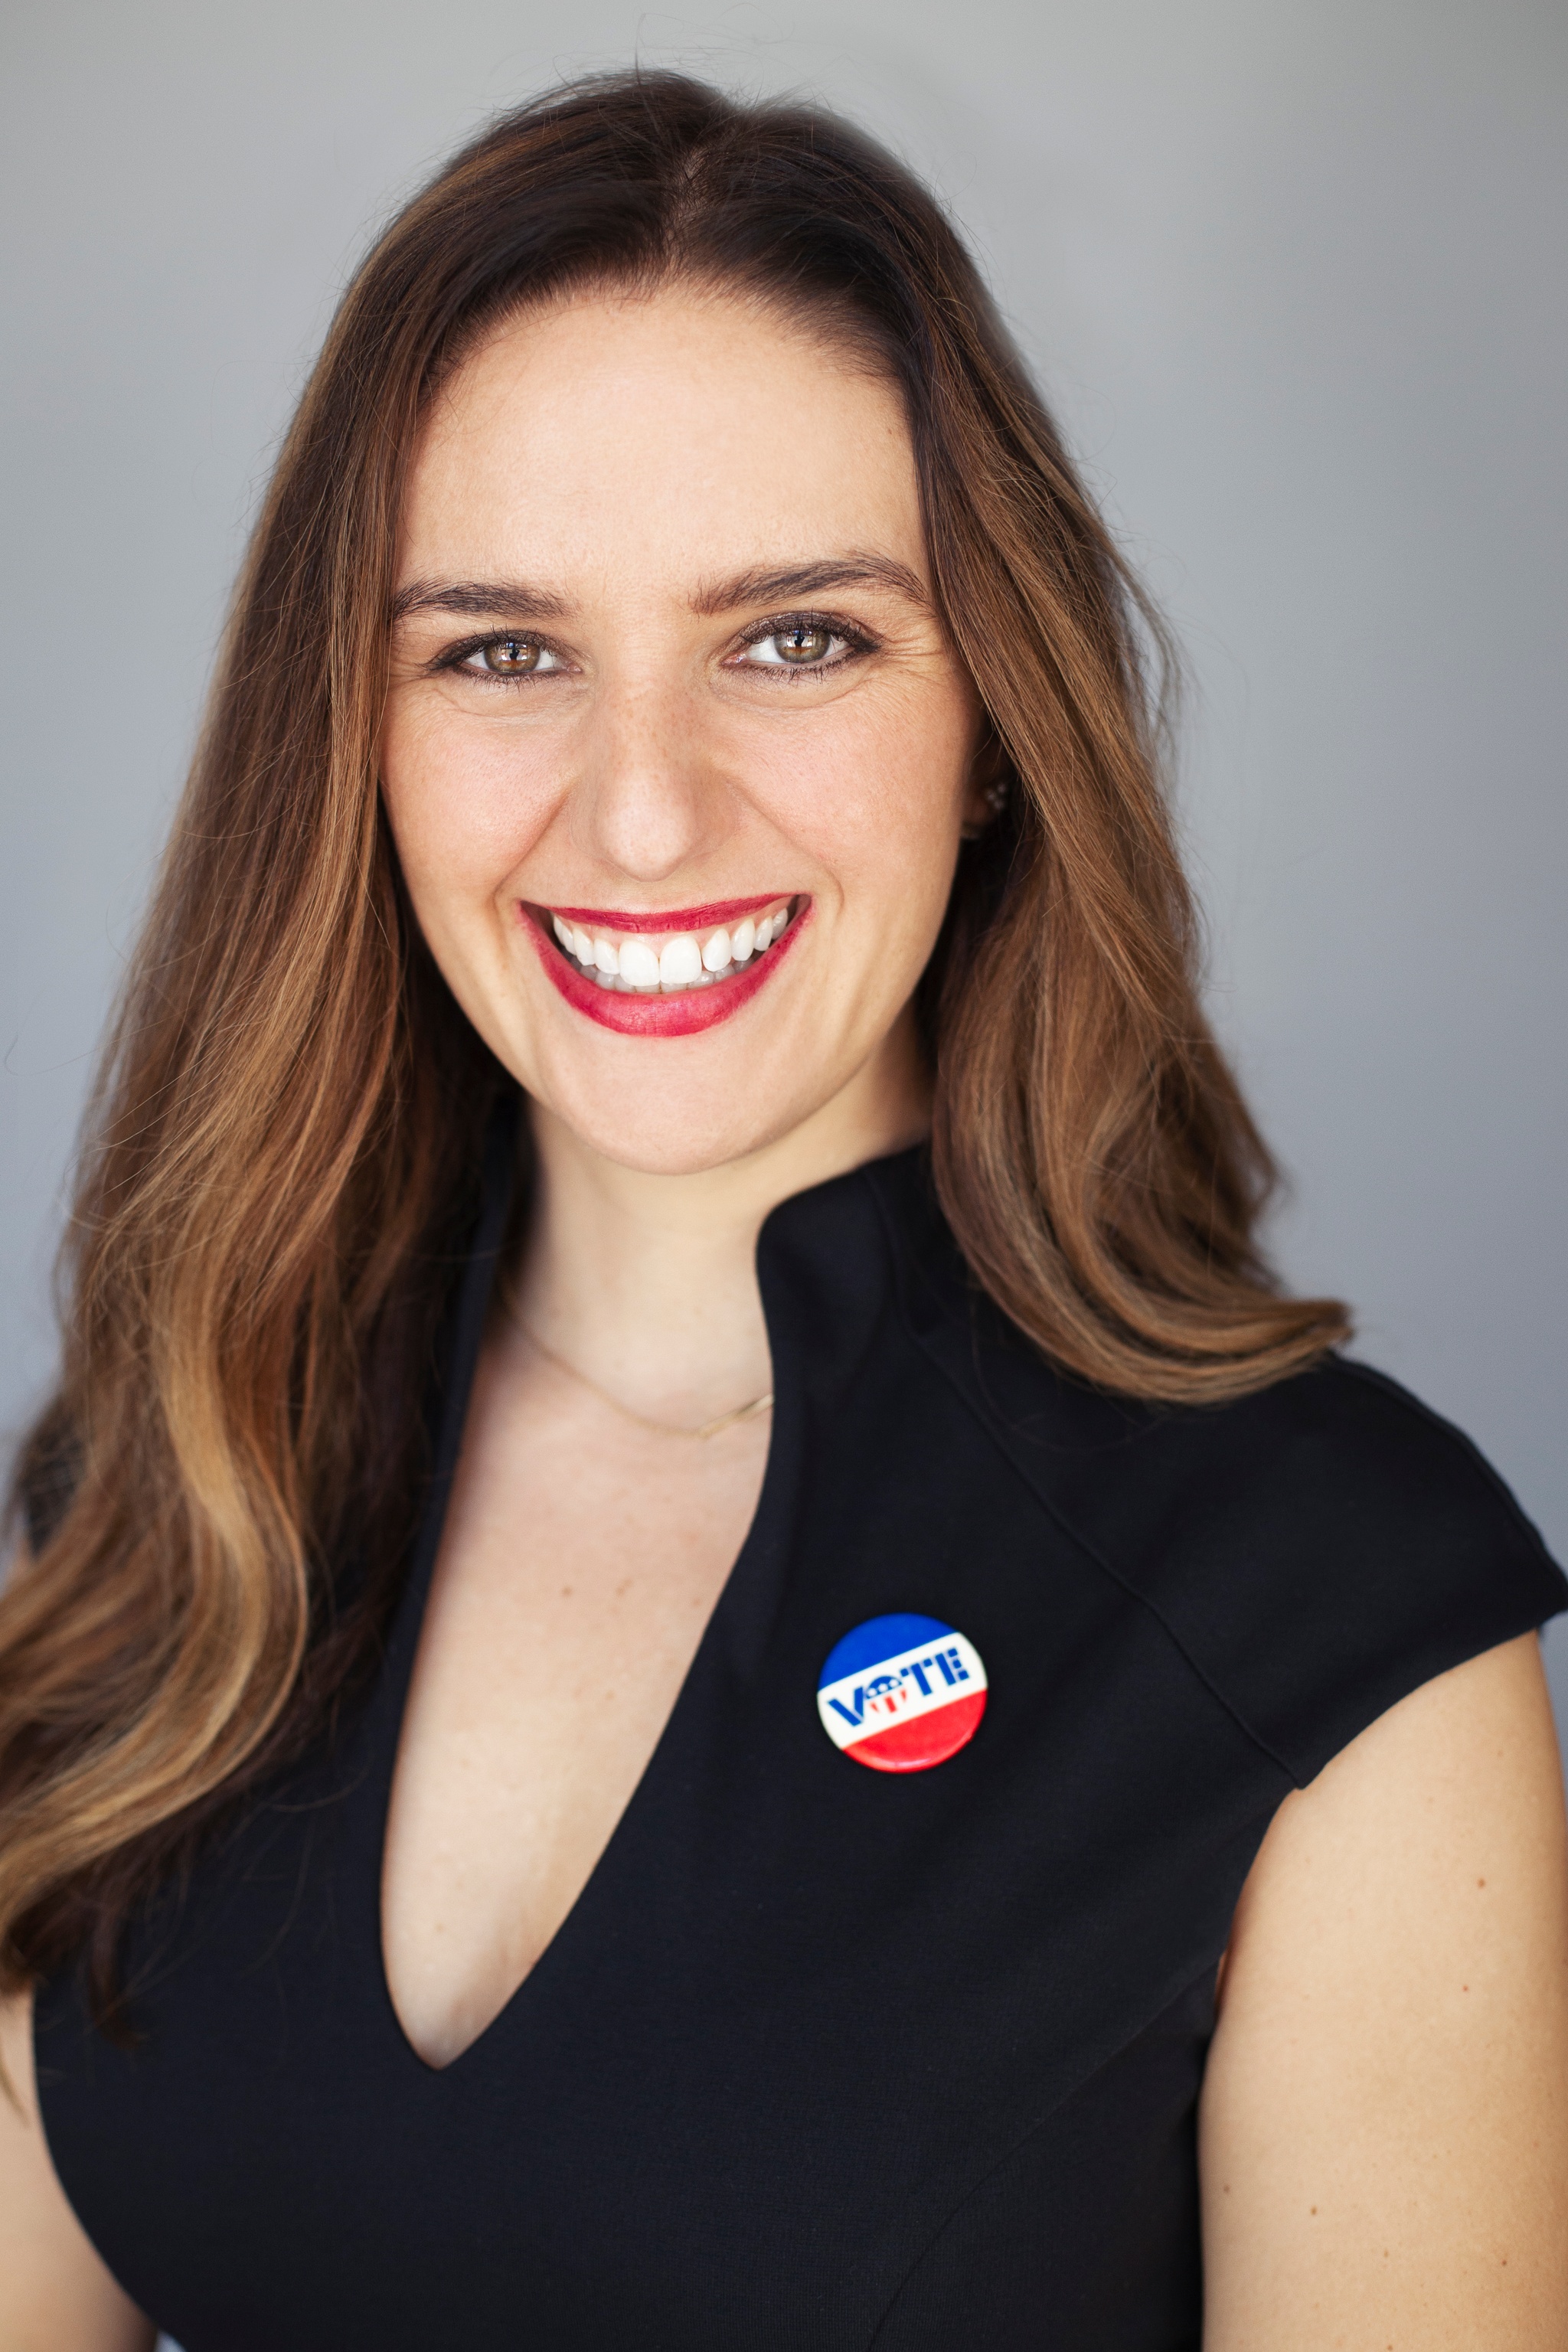 Molly McGrath smiles at the camera. She has brown hair that falls on either side of her head and wears a black blouse with a “Vote” button in red, white, and blue just below her left shoulder. 